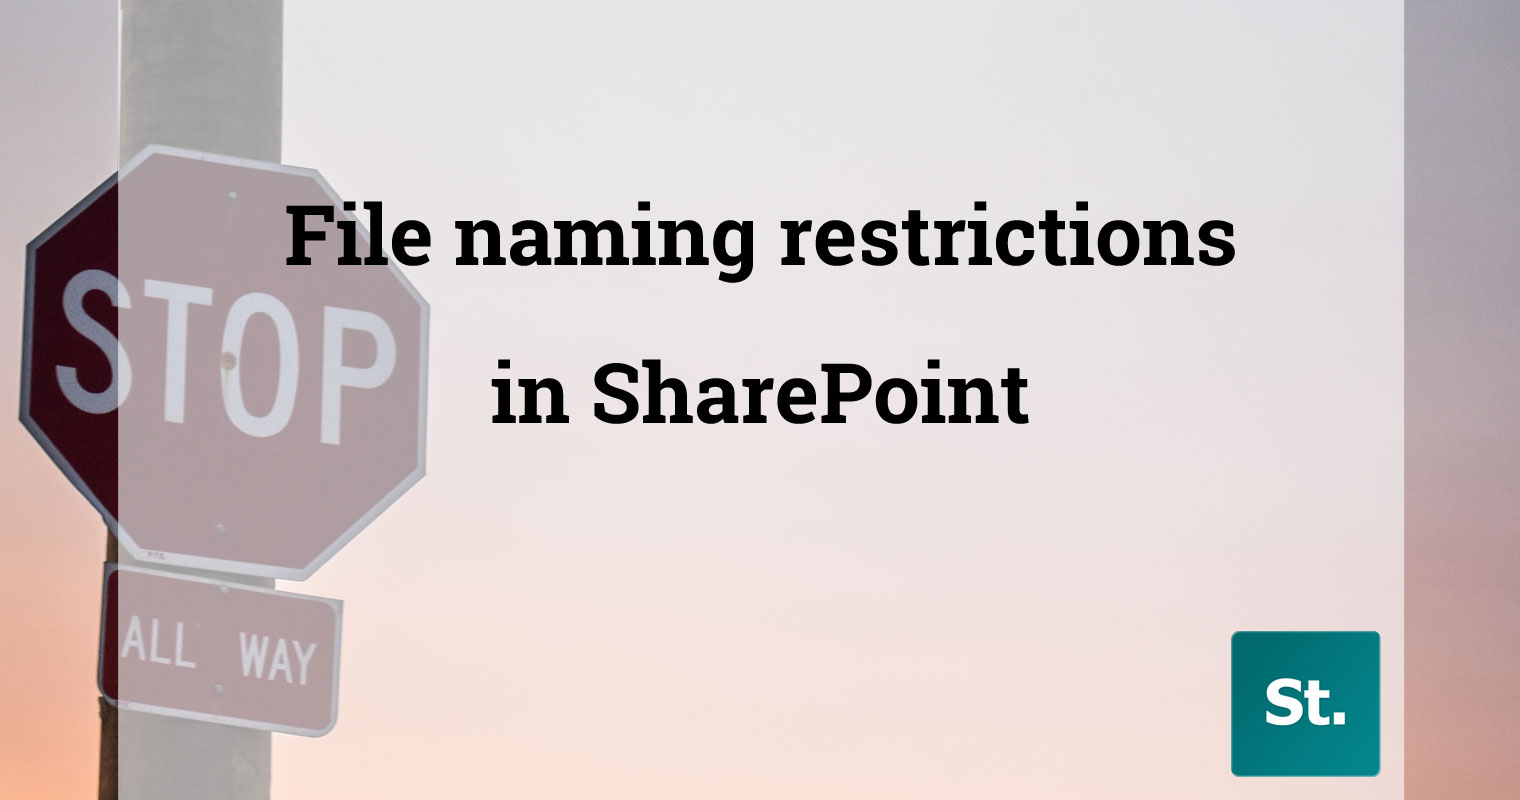 File naming restrictions in SharePoint